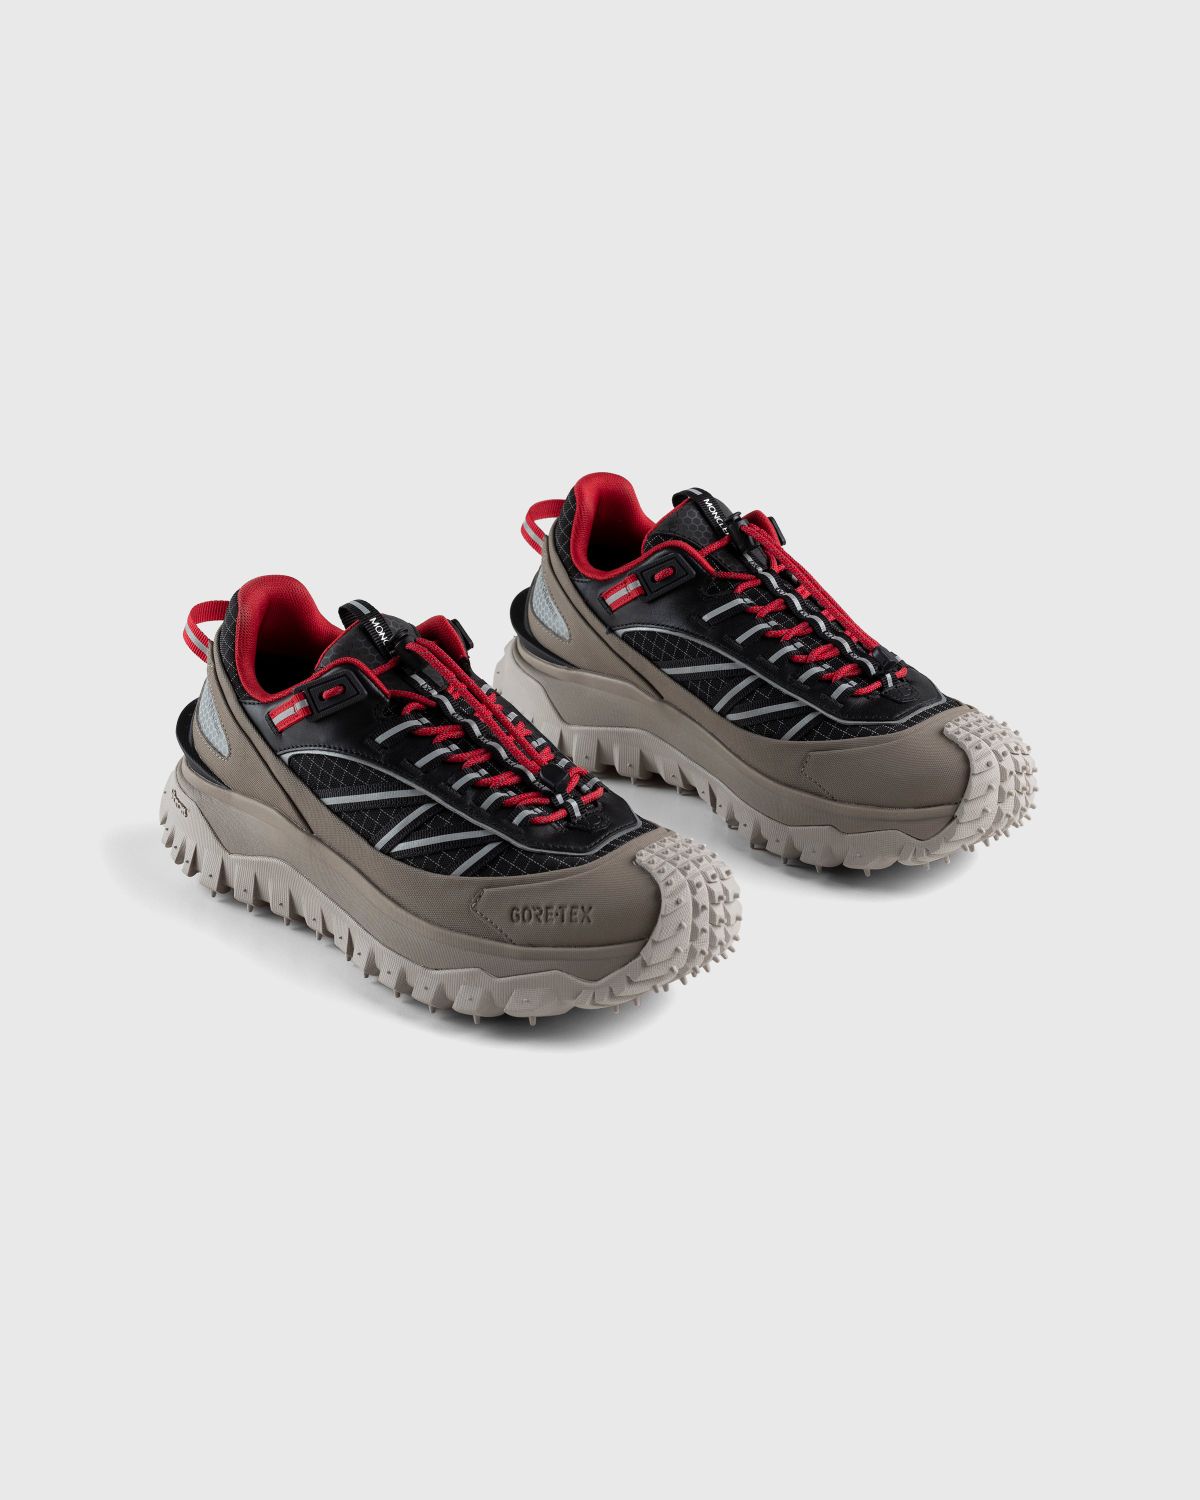 Moncler – Trailgrip GTX Sneakers Taupe - Low Top Sneakers - Beige - Image 3